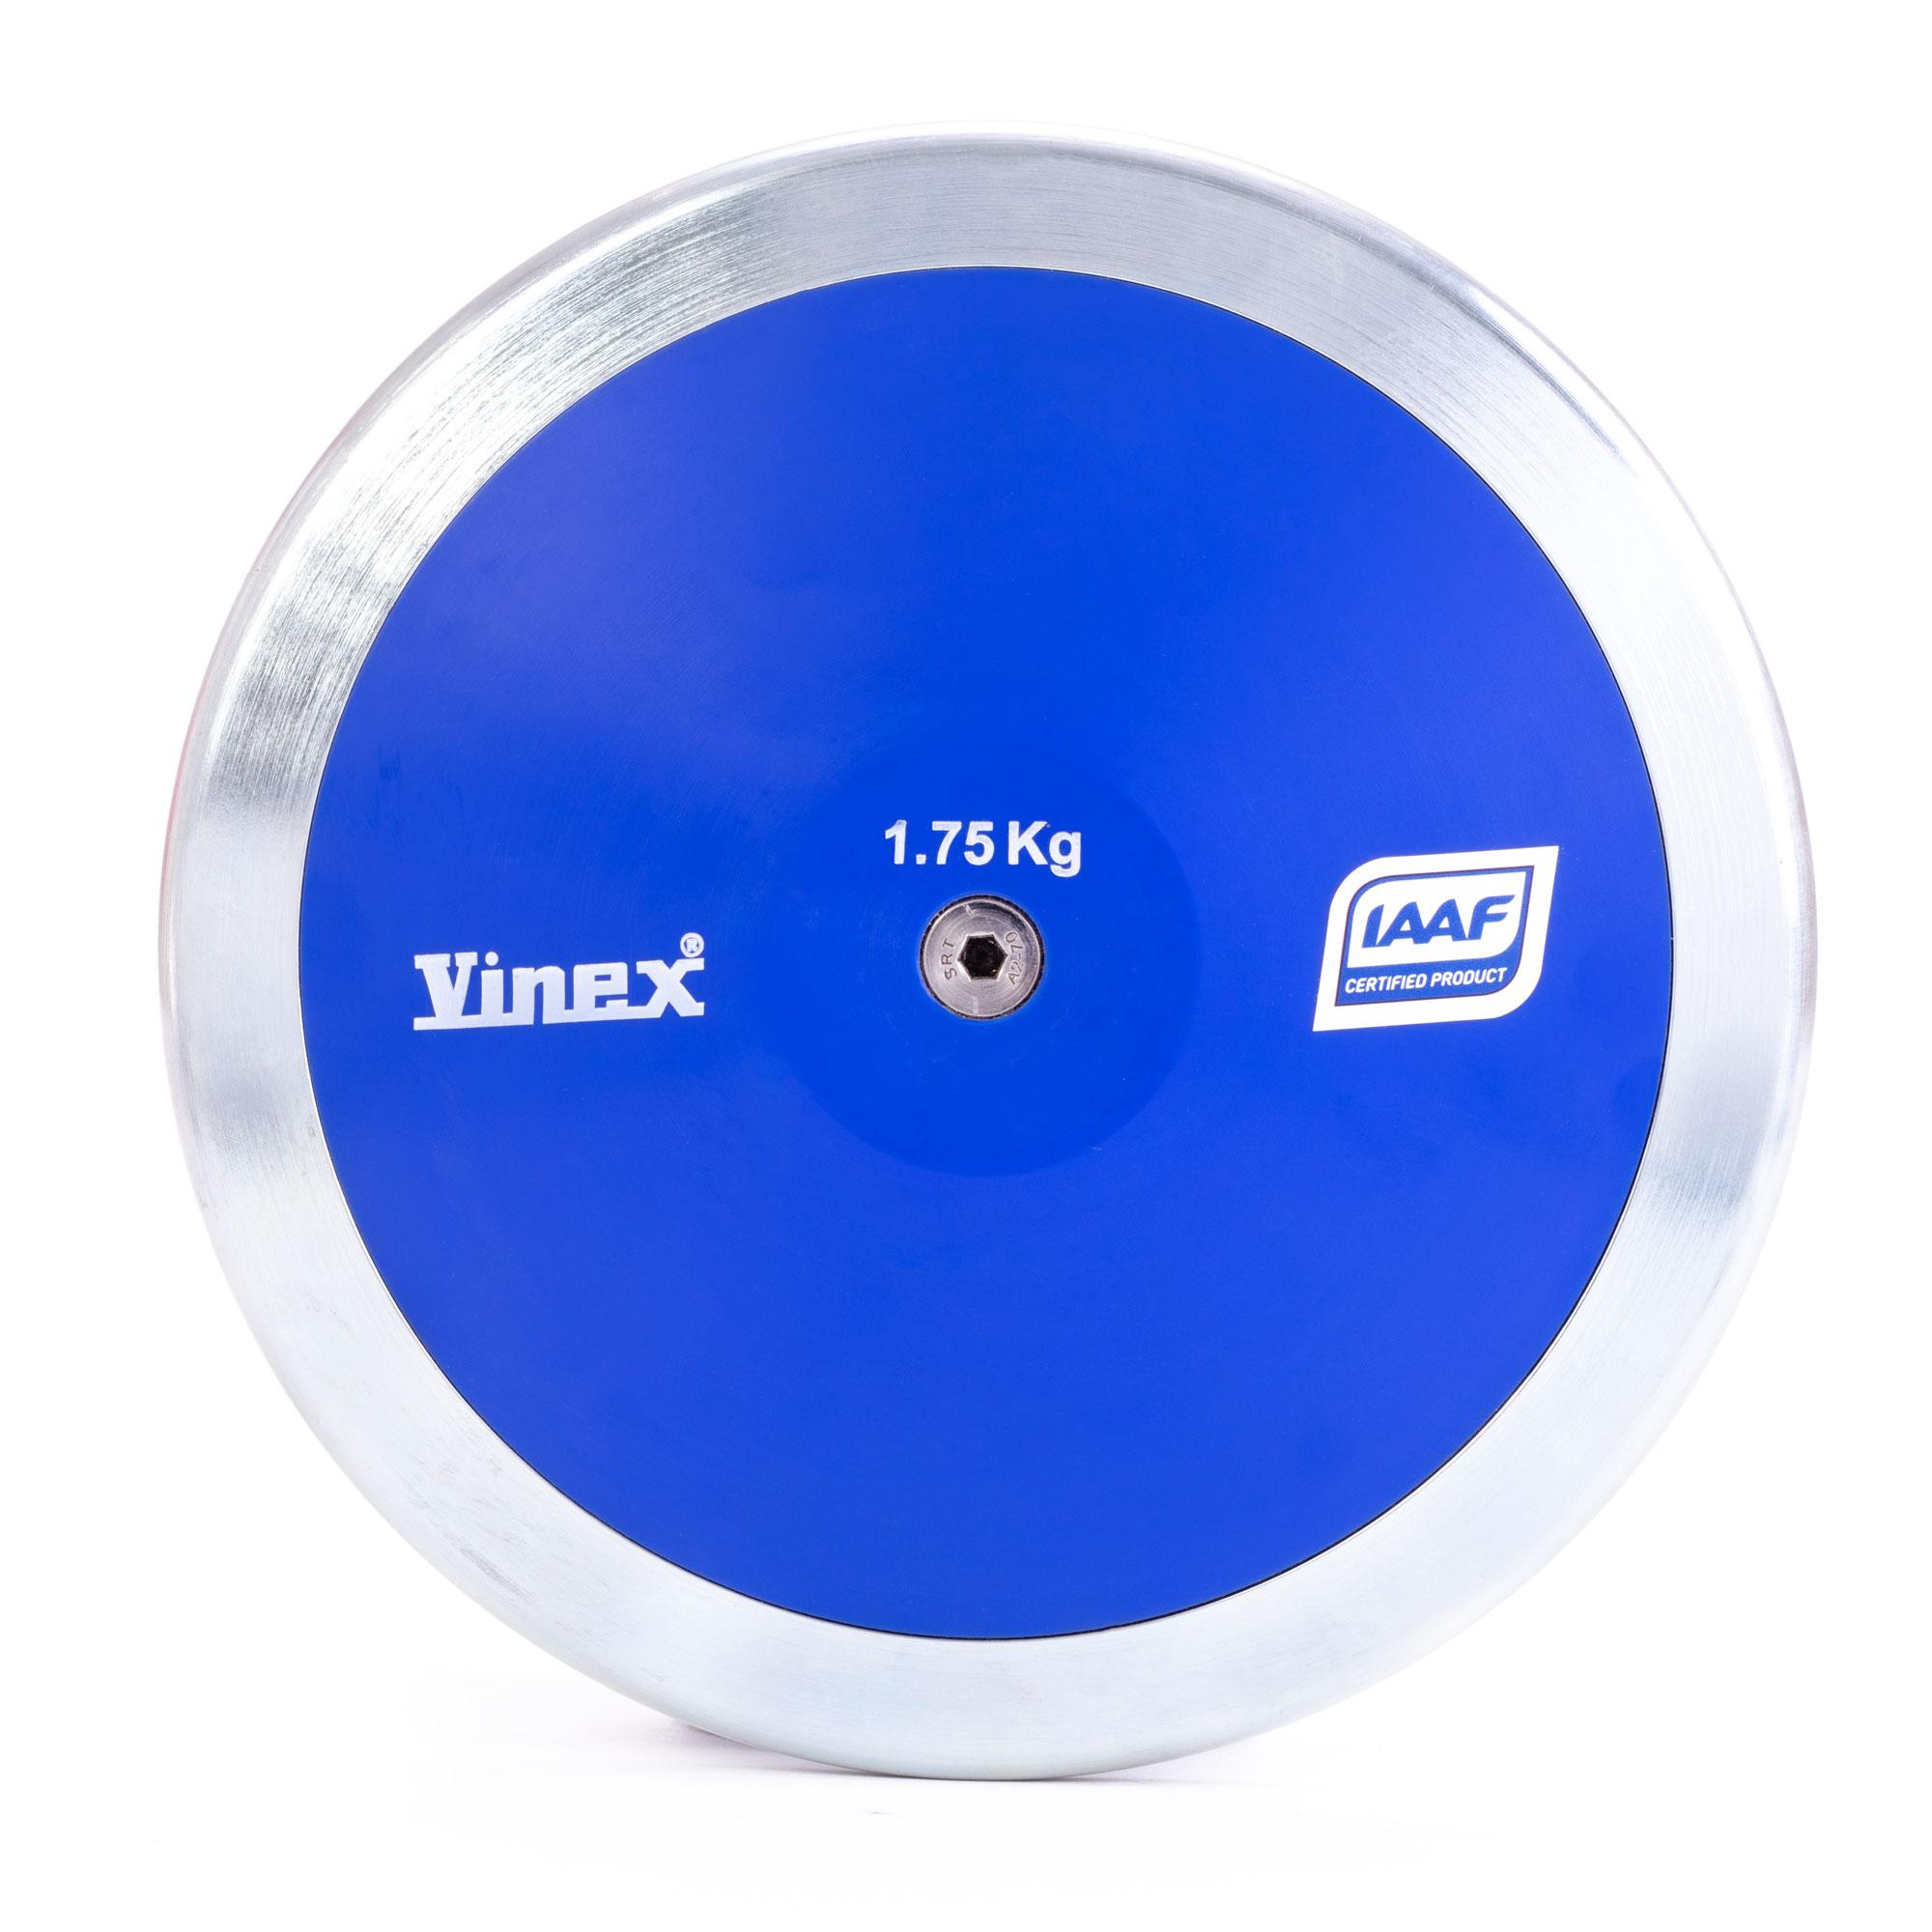 High Spin Discus, 1.75 kg - 80% Rim Weight